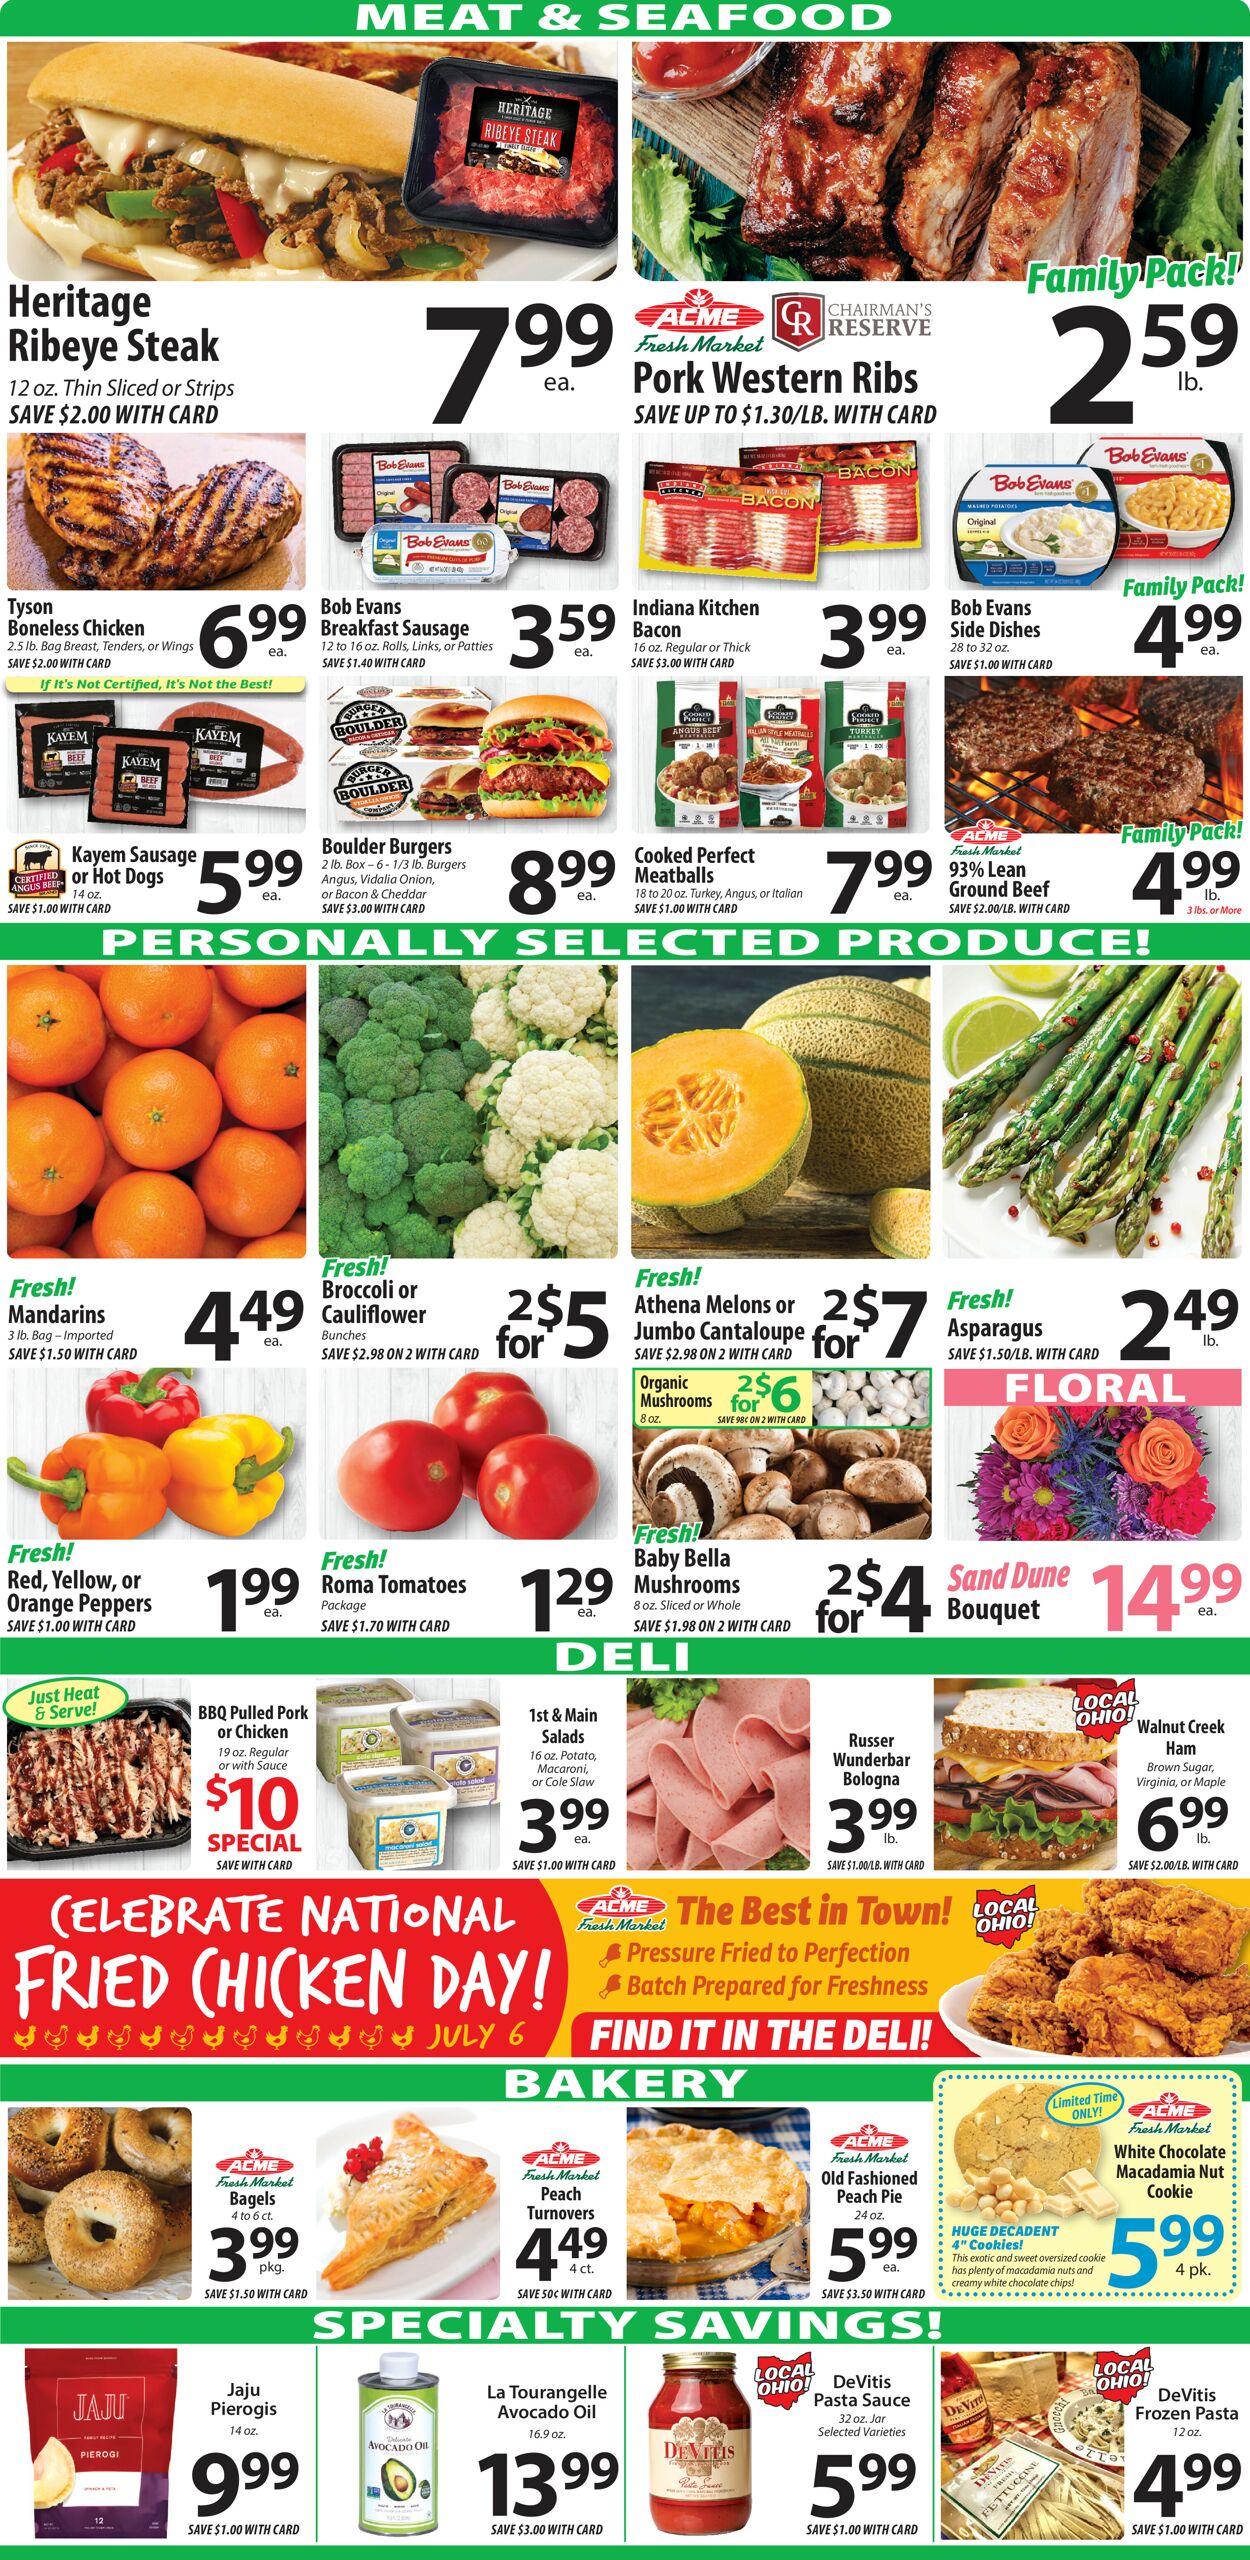 Acme Fresh Market Ad from 07/06/2023